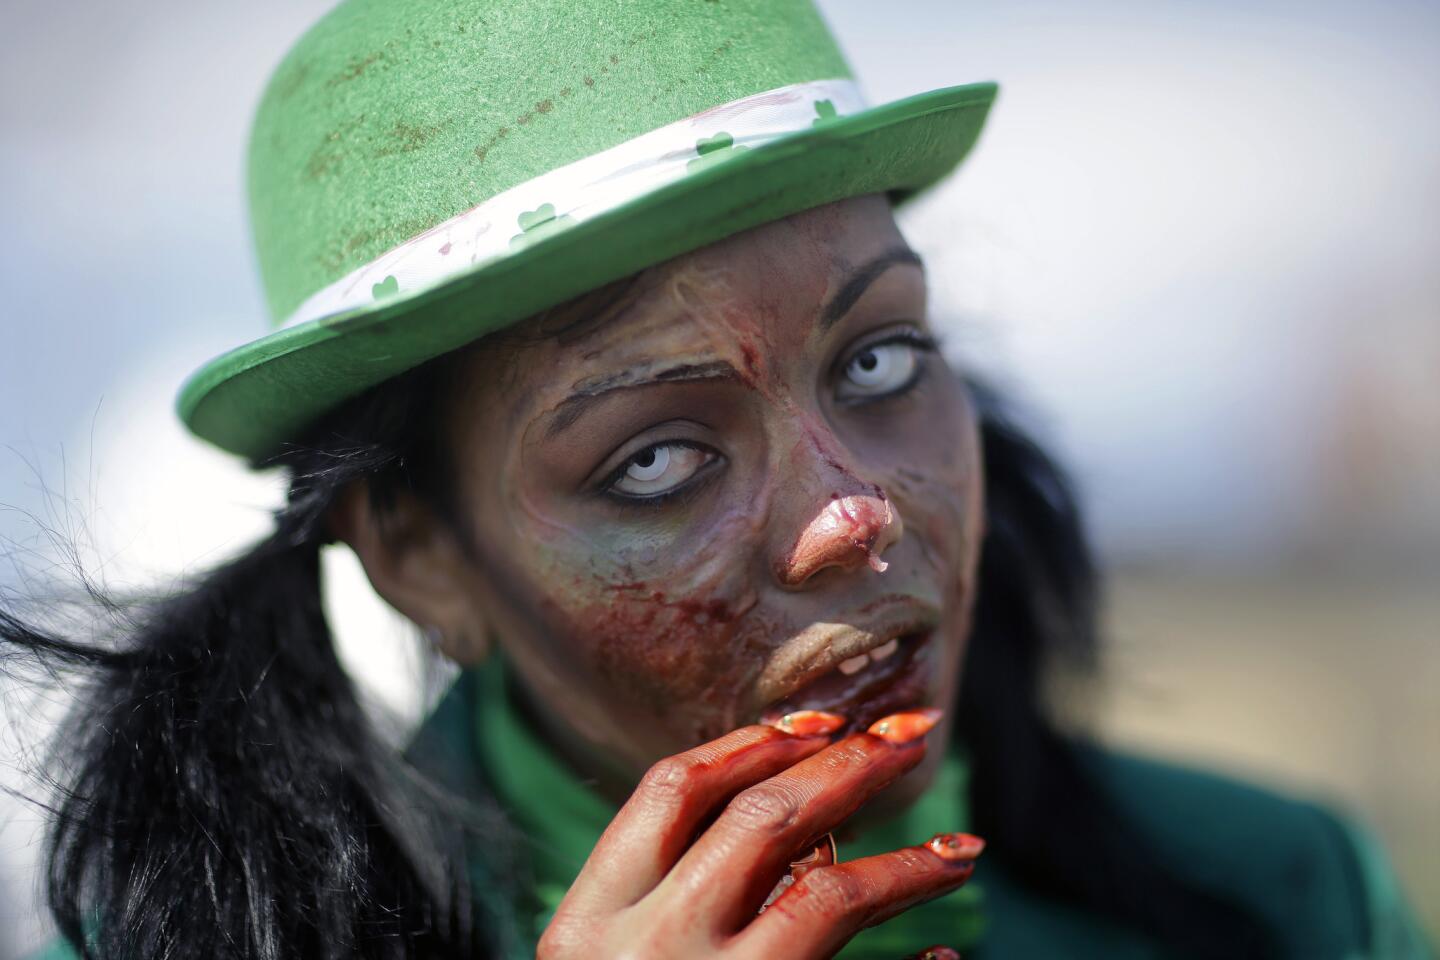 St. Patrick's Day brings out the Irishman (and Irishwoman) in all of us. And some take that task pretty seriously. We combed through our archives and our Flickr account and gathered this look at 17 things that shouldn't be green -- but are! -- on St. Patrick's Day. Take zombies. The zombies on "The Walking Dead" never look like this. Maybe this is a leprechaun zombie?